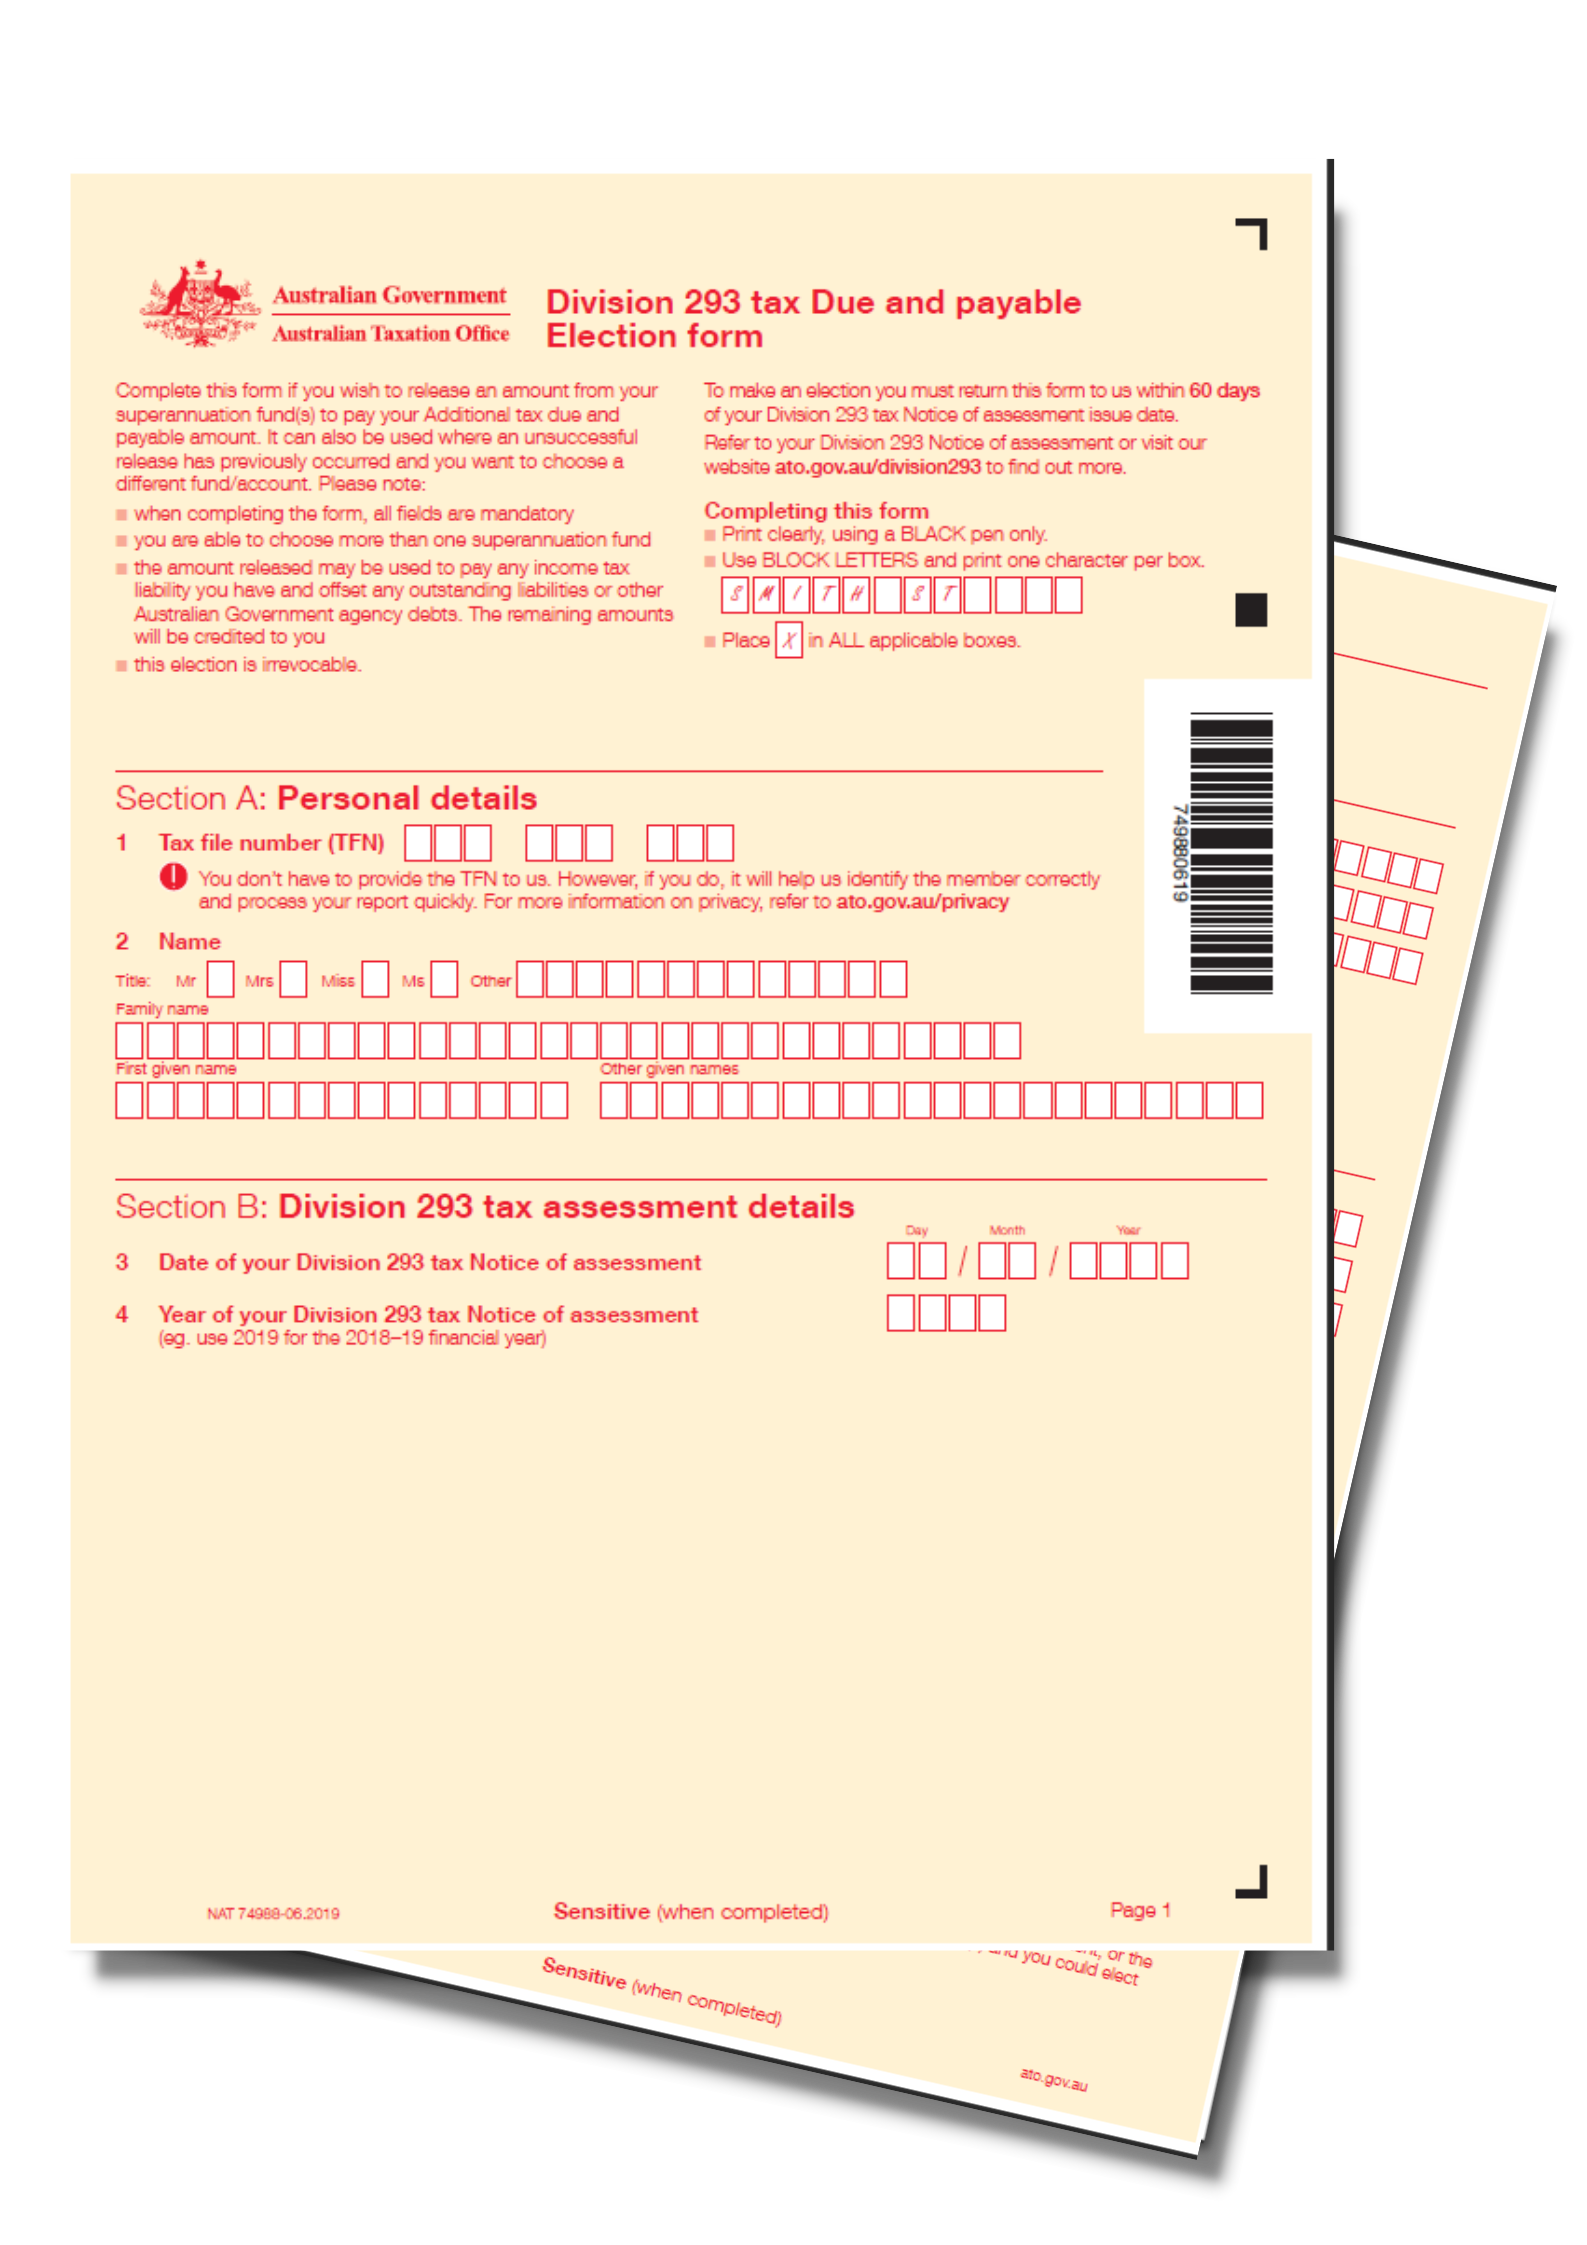 Division-293-tax-Due-and-payable-Election-form